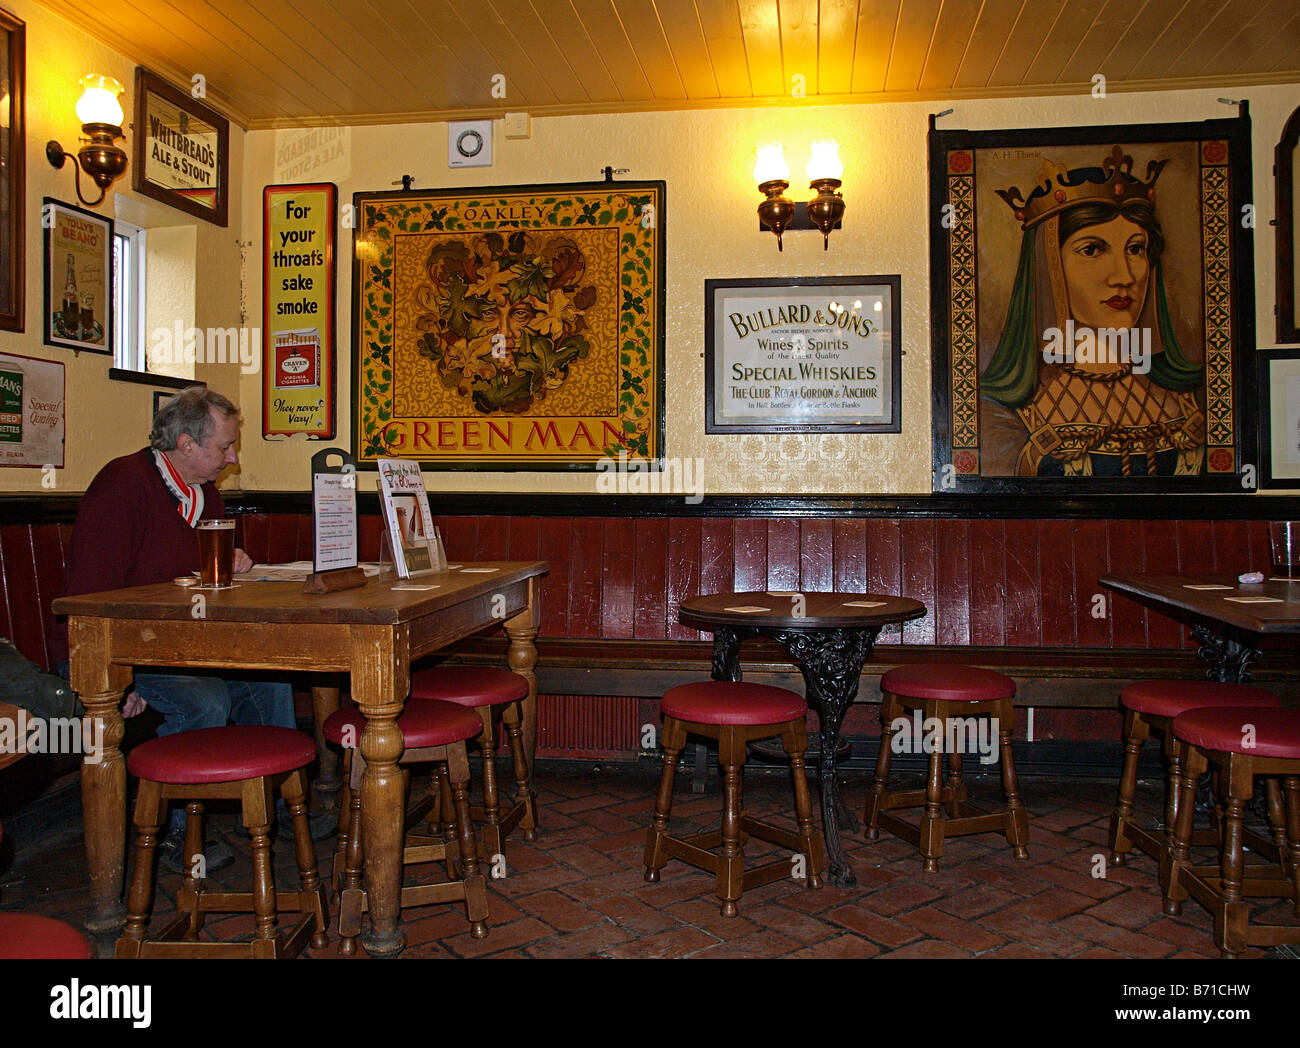 INTERIOR OF THE FAT CAT PUBLIC HOUSE WEST END STREET NORWICH NORFOLK EAST ANGLIA ENGLAND UK Stock Photo